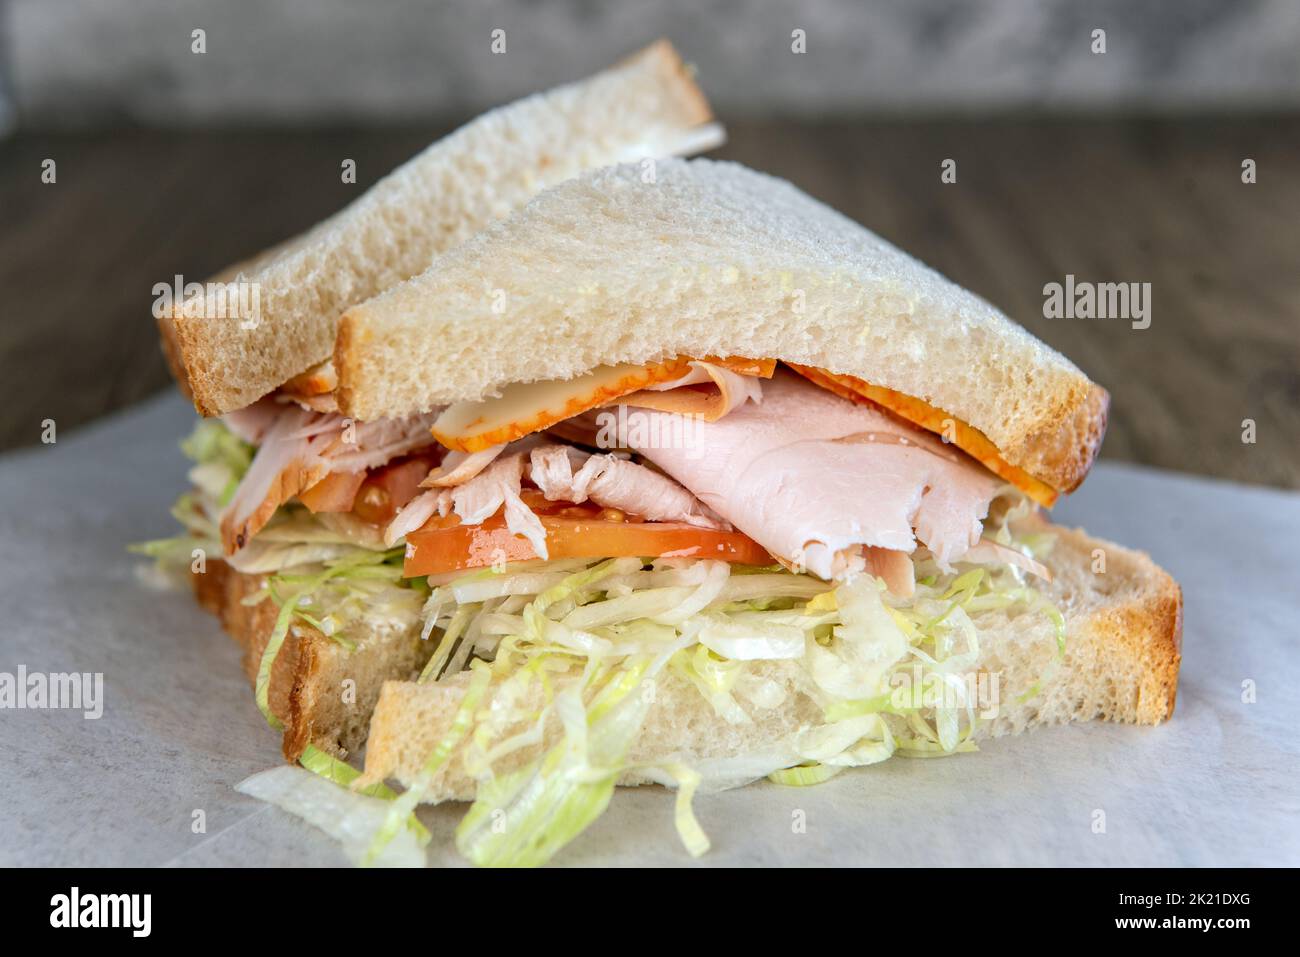 Lunch is served with a loaded smoked turkey sandwich overflowing between slices of sourdough toast. Stock Photo